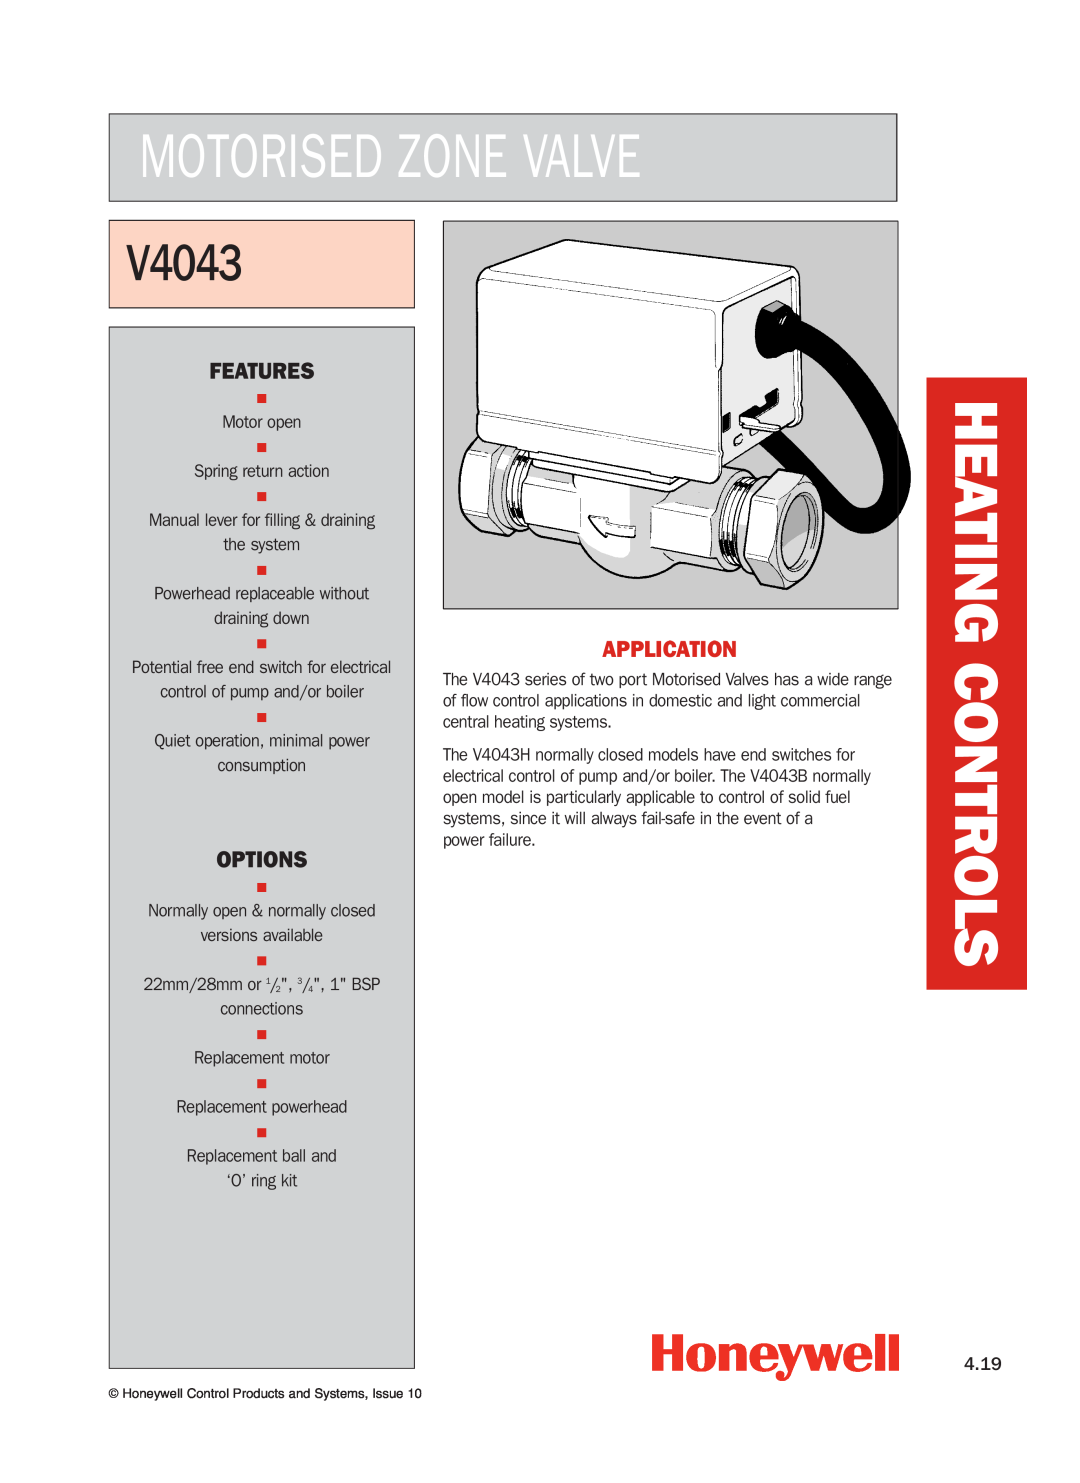 Honeywell V4043 manual Motorised Zone Valve, Heating Controls, Features, Options, Application 